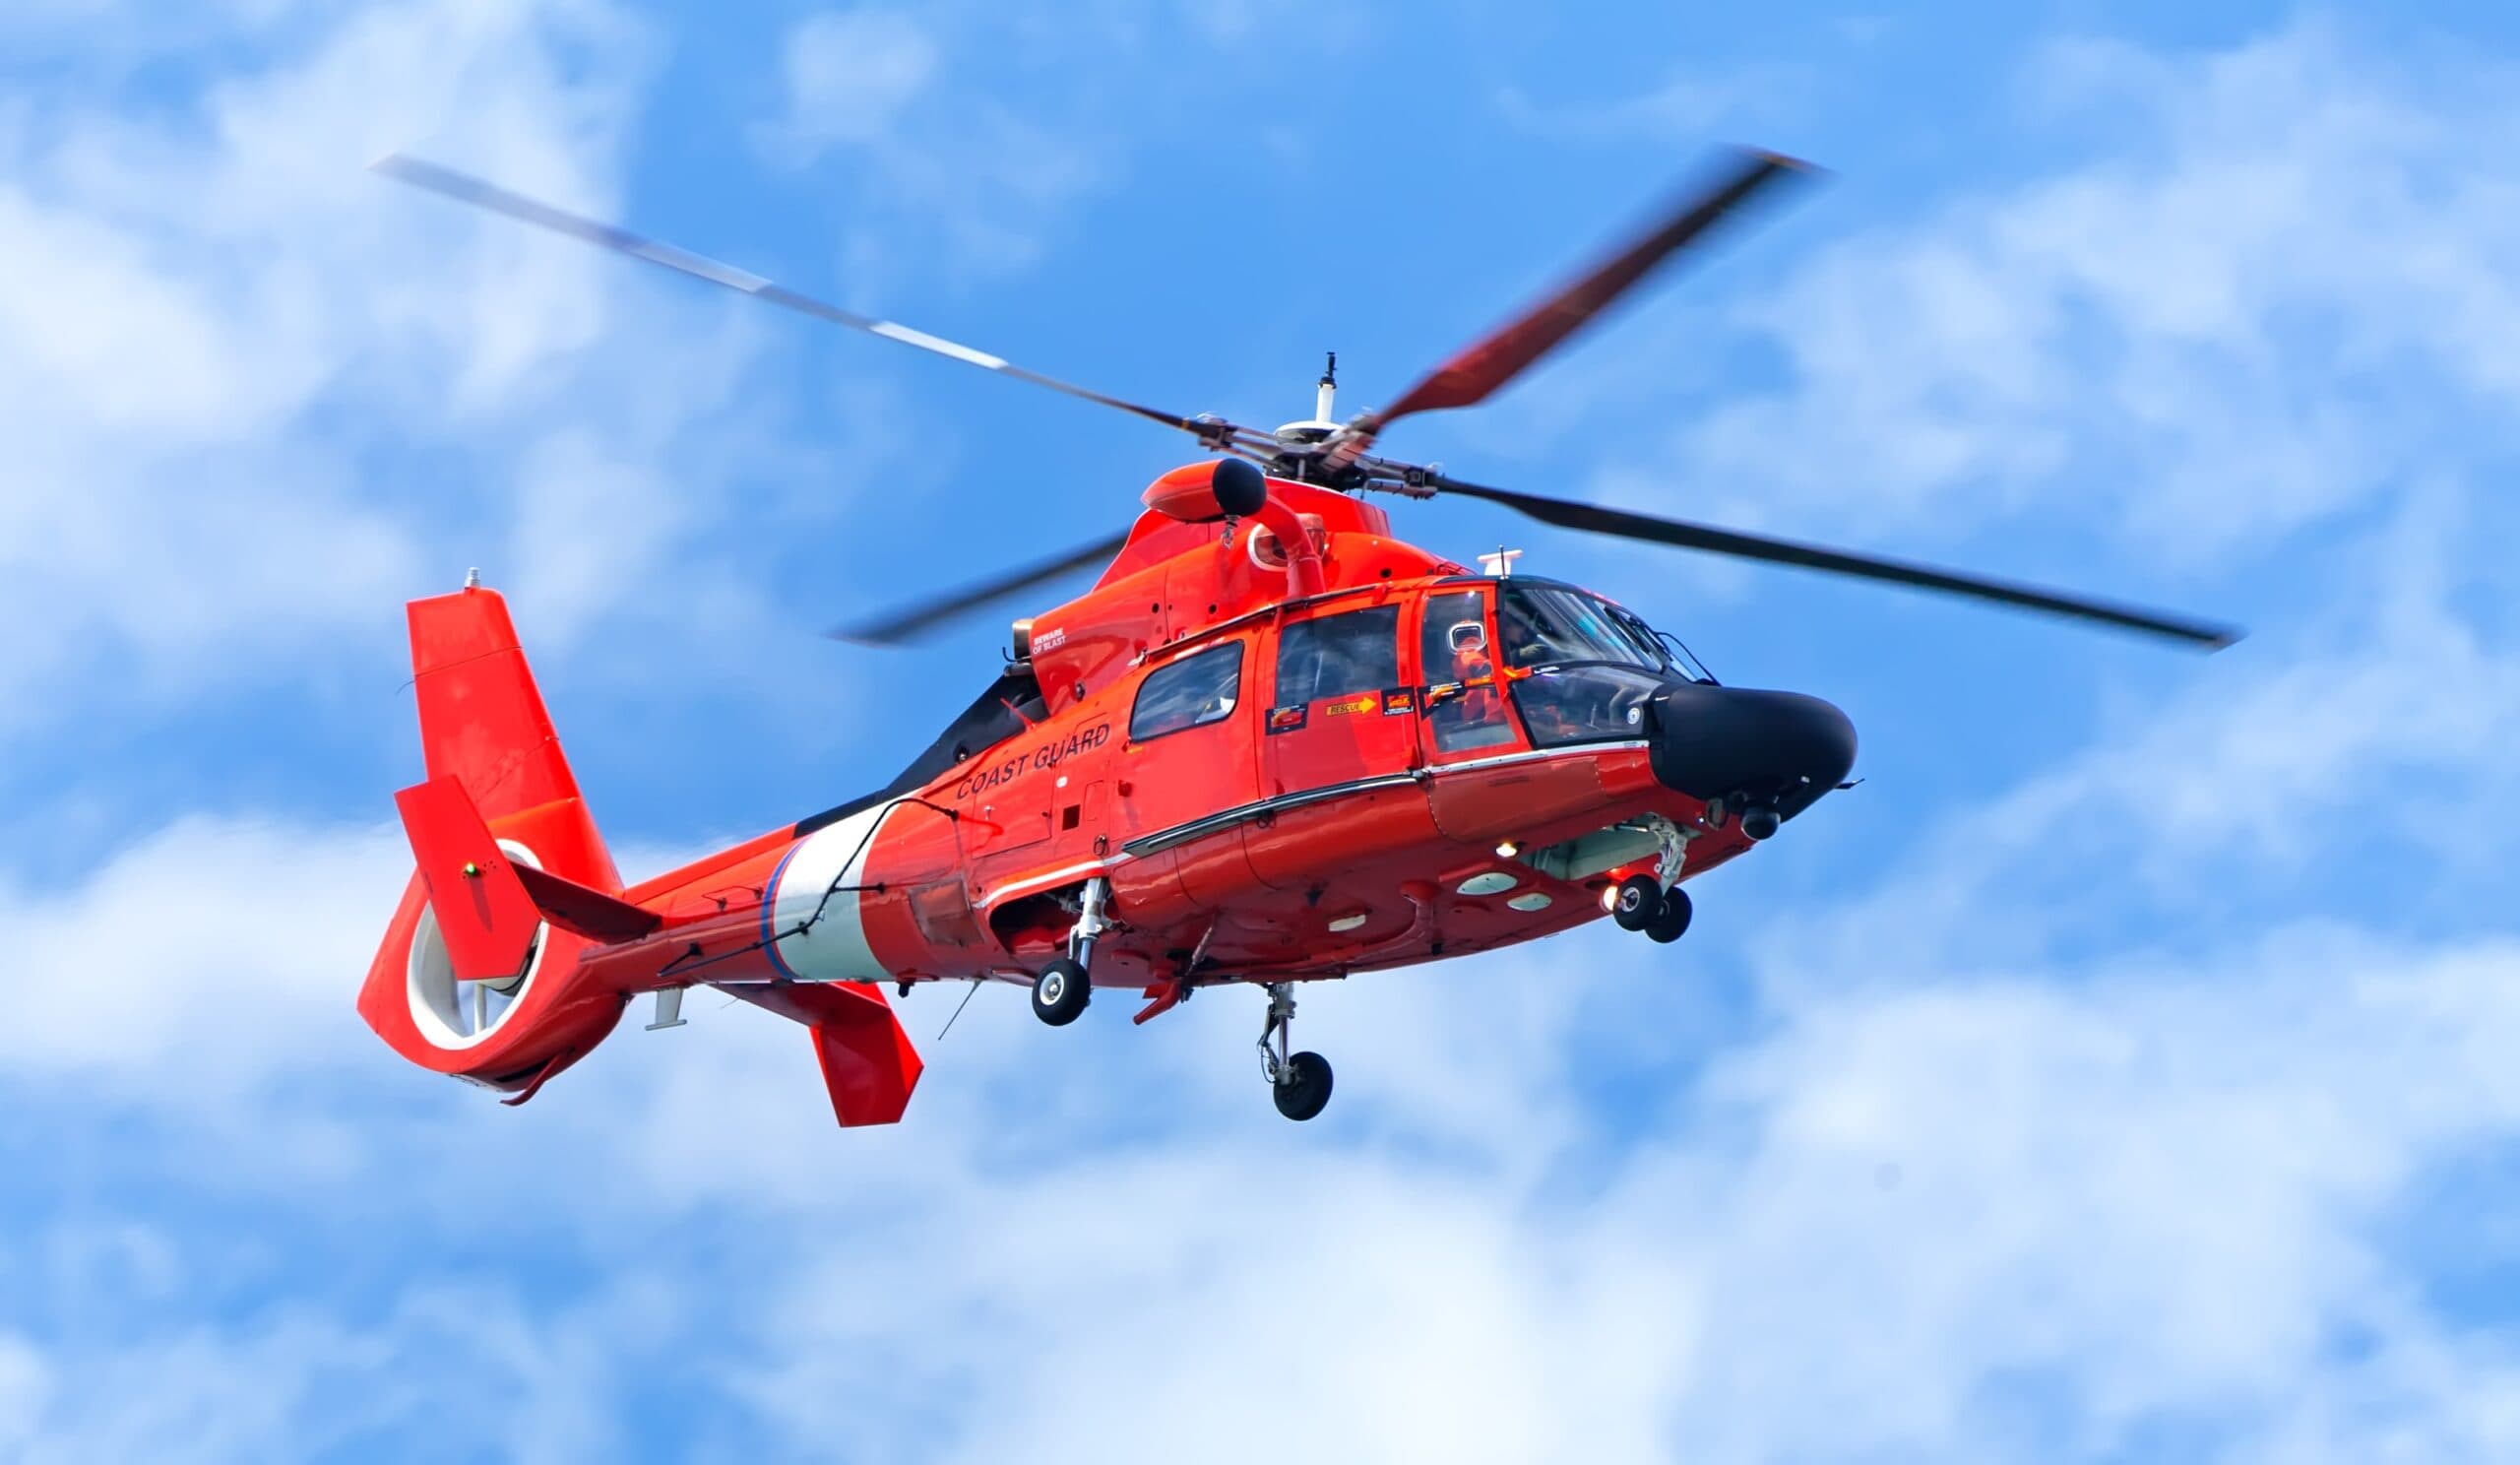 A red coast guard helicopter flying in the sky.